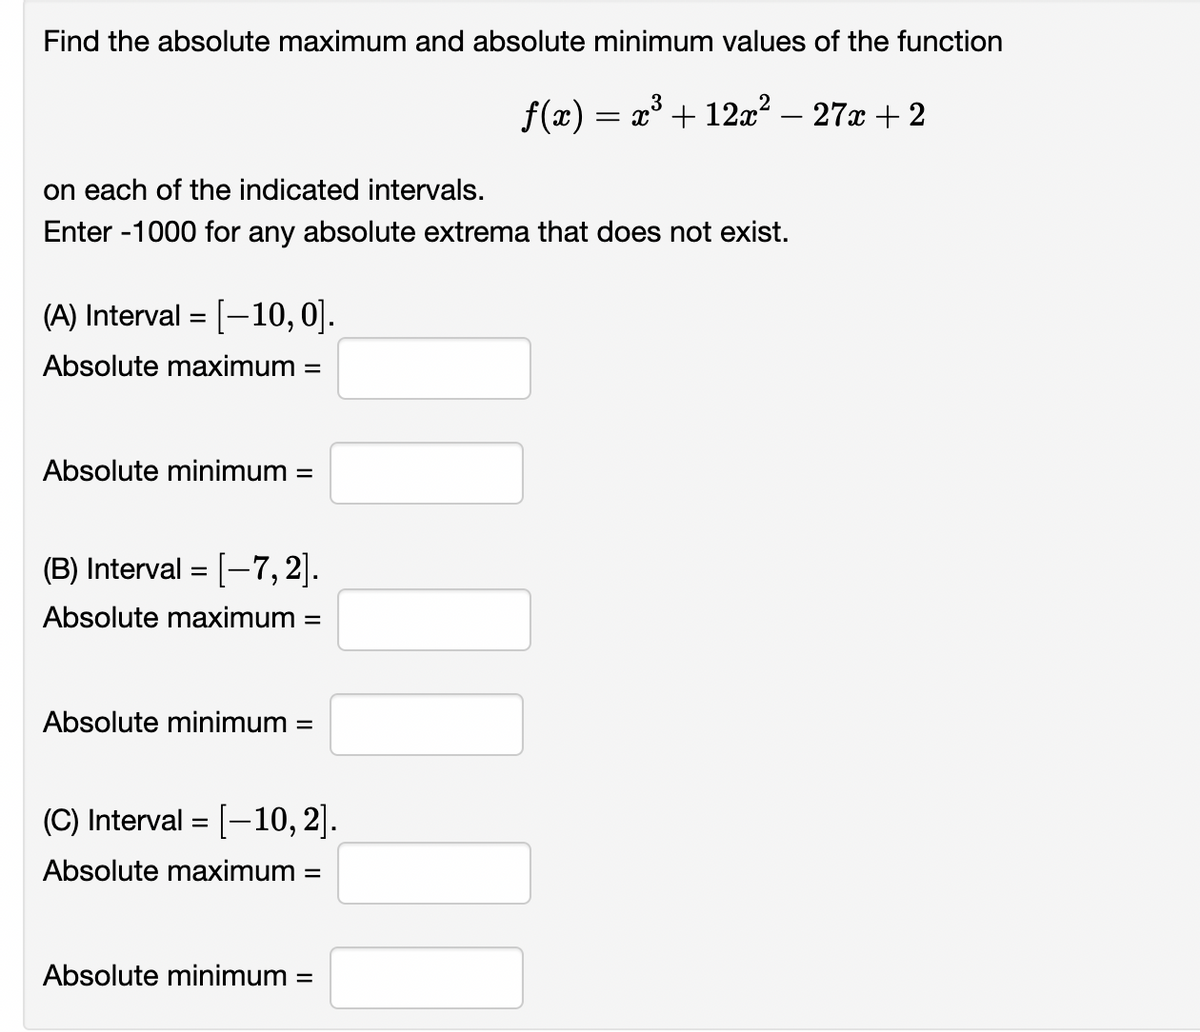 Find the absolute maximum and absolute minimum values of the function
= x° + 12x? – 27x + 2
on each of the indicated intervals.
Enter -1000 for any absolute extrema that does not exist.
(A) Interval = [-10, 0].
Absolute maximum =
Absolute minimum =
(B) Interval = [-7,2].
Absolute maximum =
Absolute minimum =
(C) Interval = [-10, 2].
Absolute maximum
Absolute minimum =
